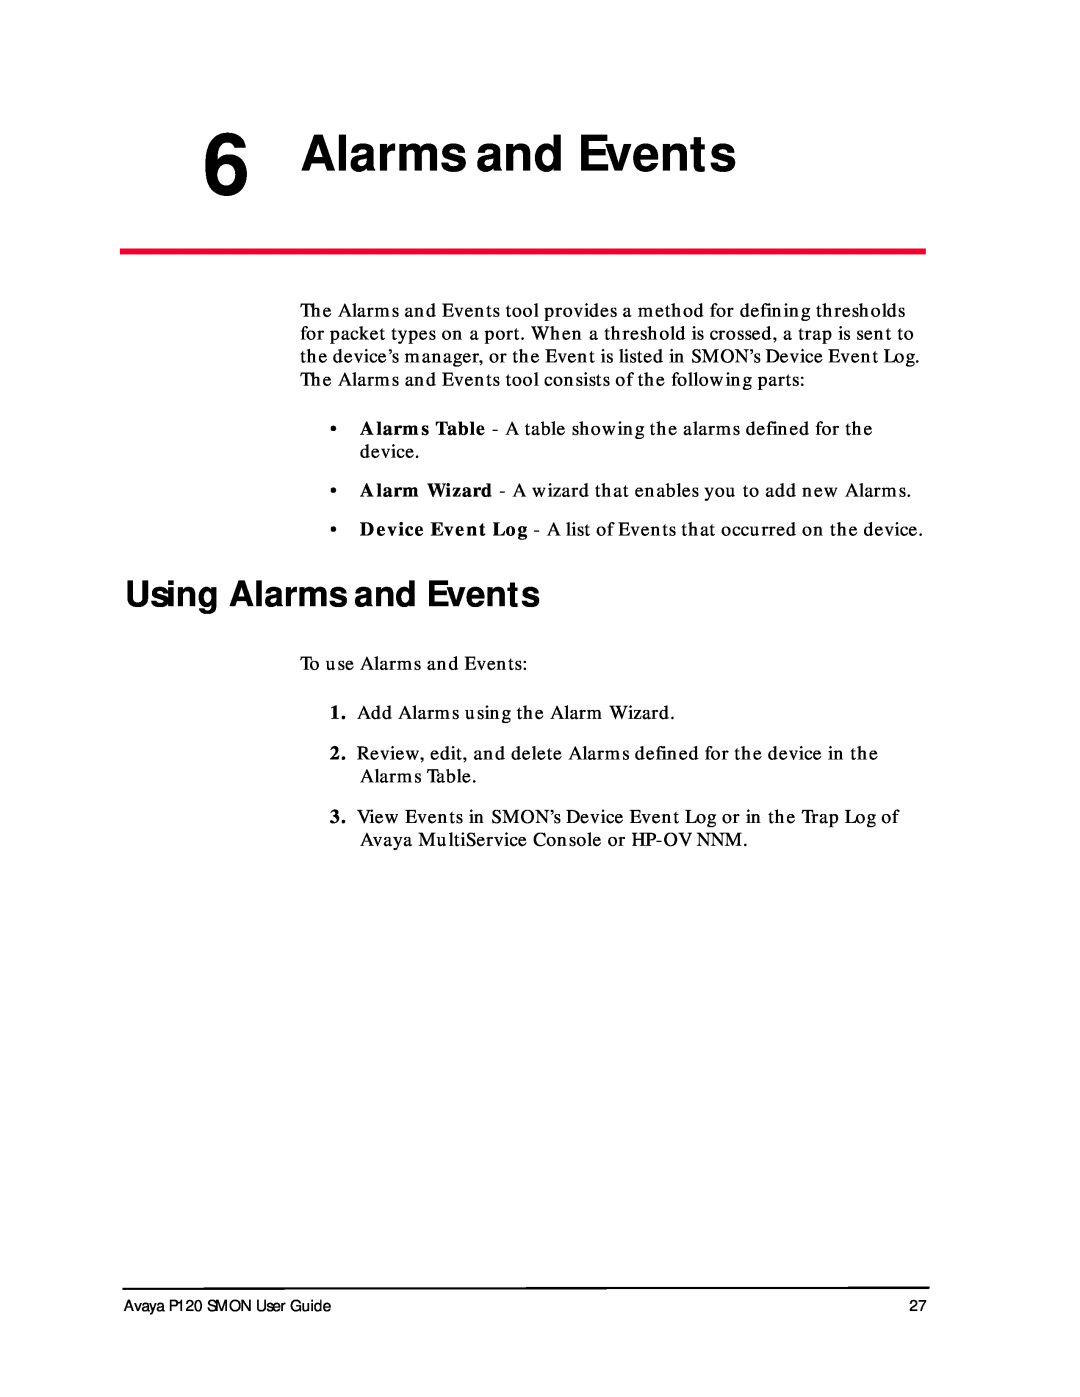 Avaya P120 SMON manual Using Alarms and Events 